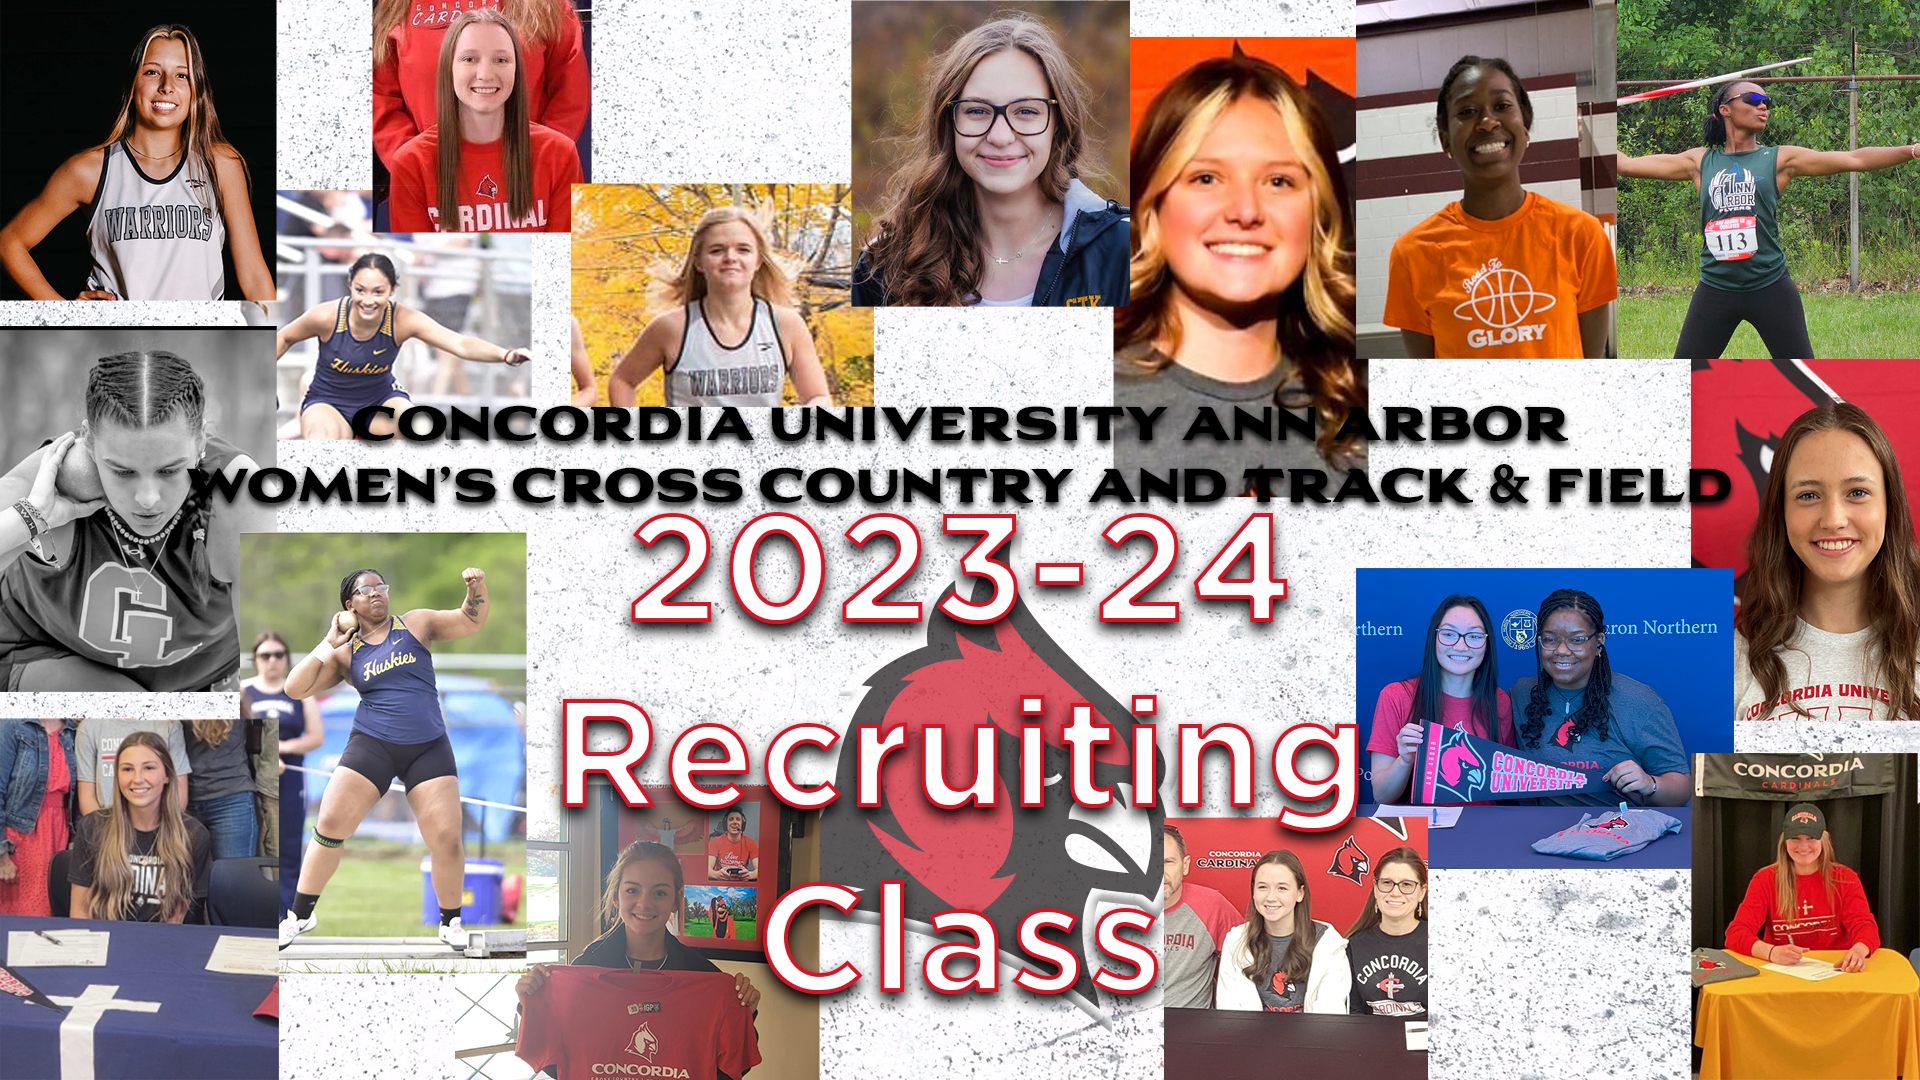 Women's Cross Country and Track & Field announce the 2023-24 Recruiting Class